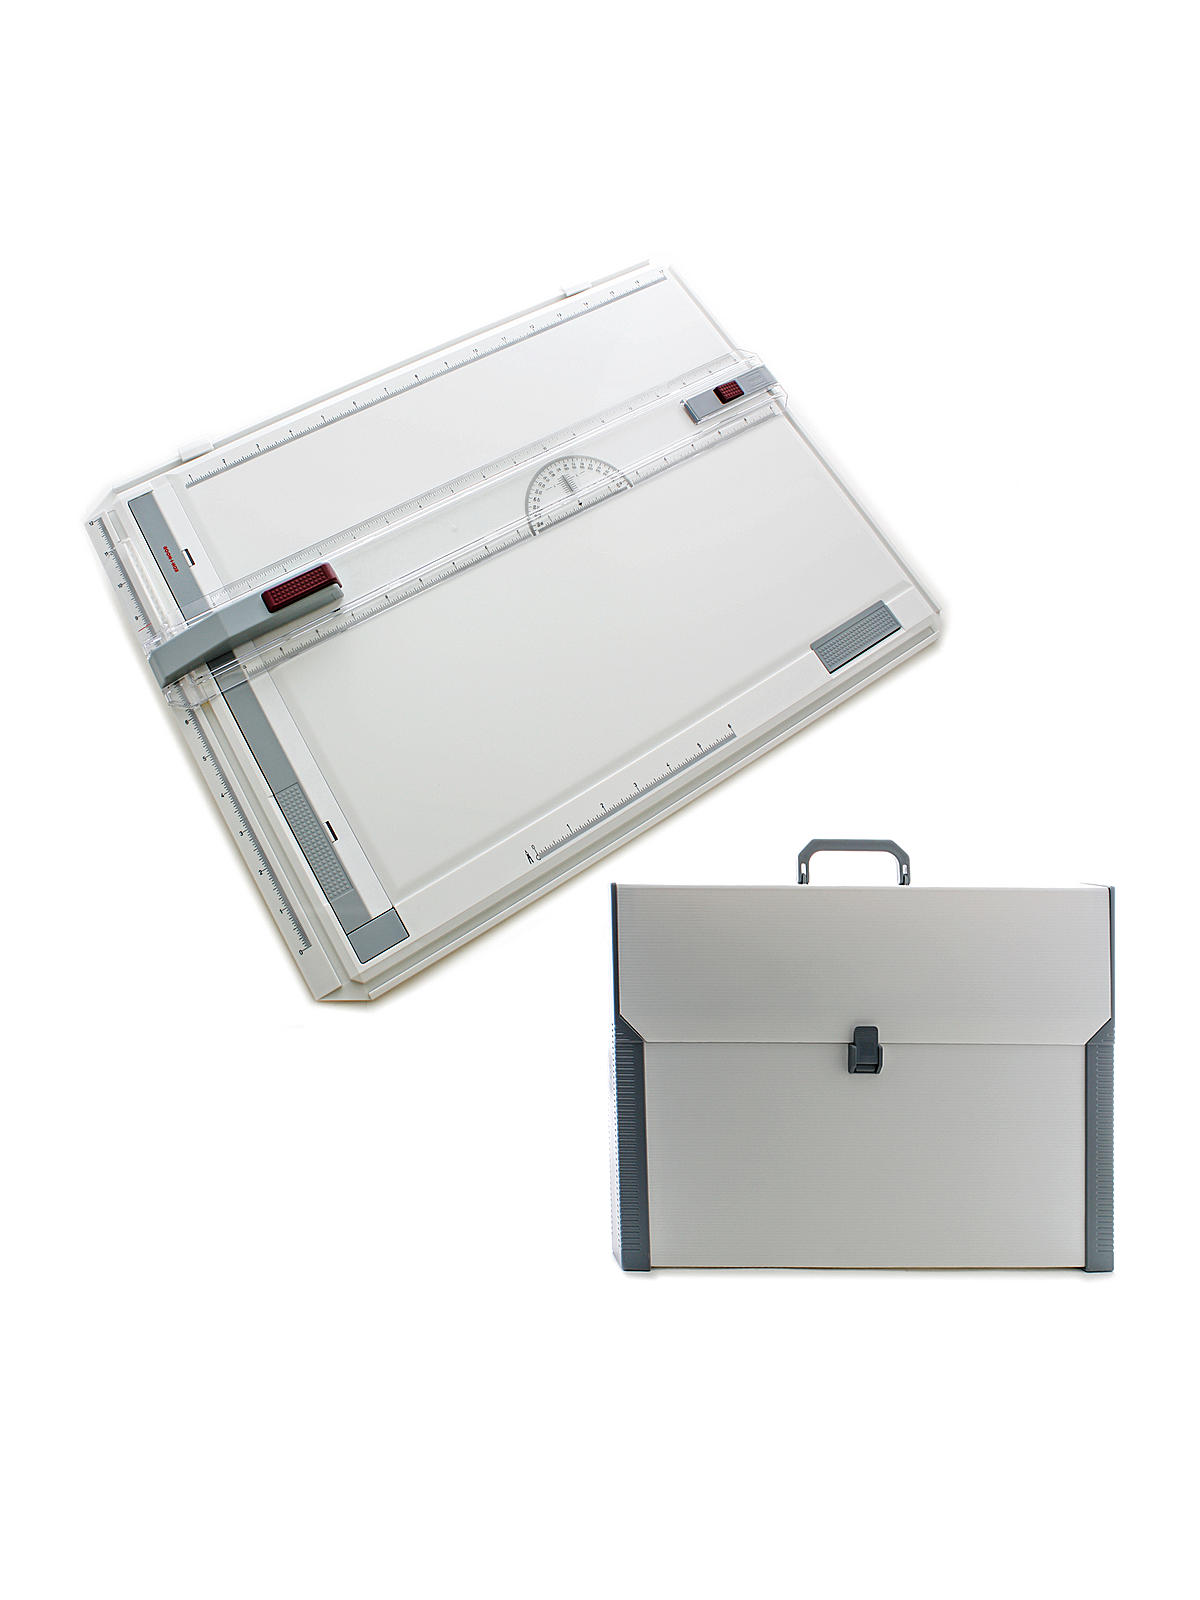 Portable Drawing Board Supports Paper Up To 14 In. X 19 In.